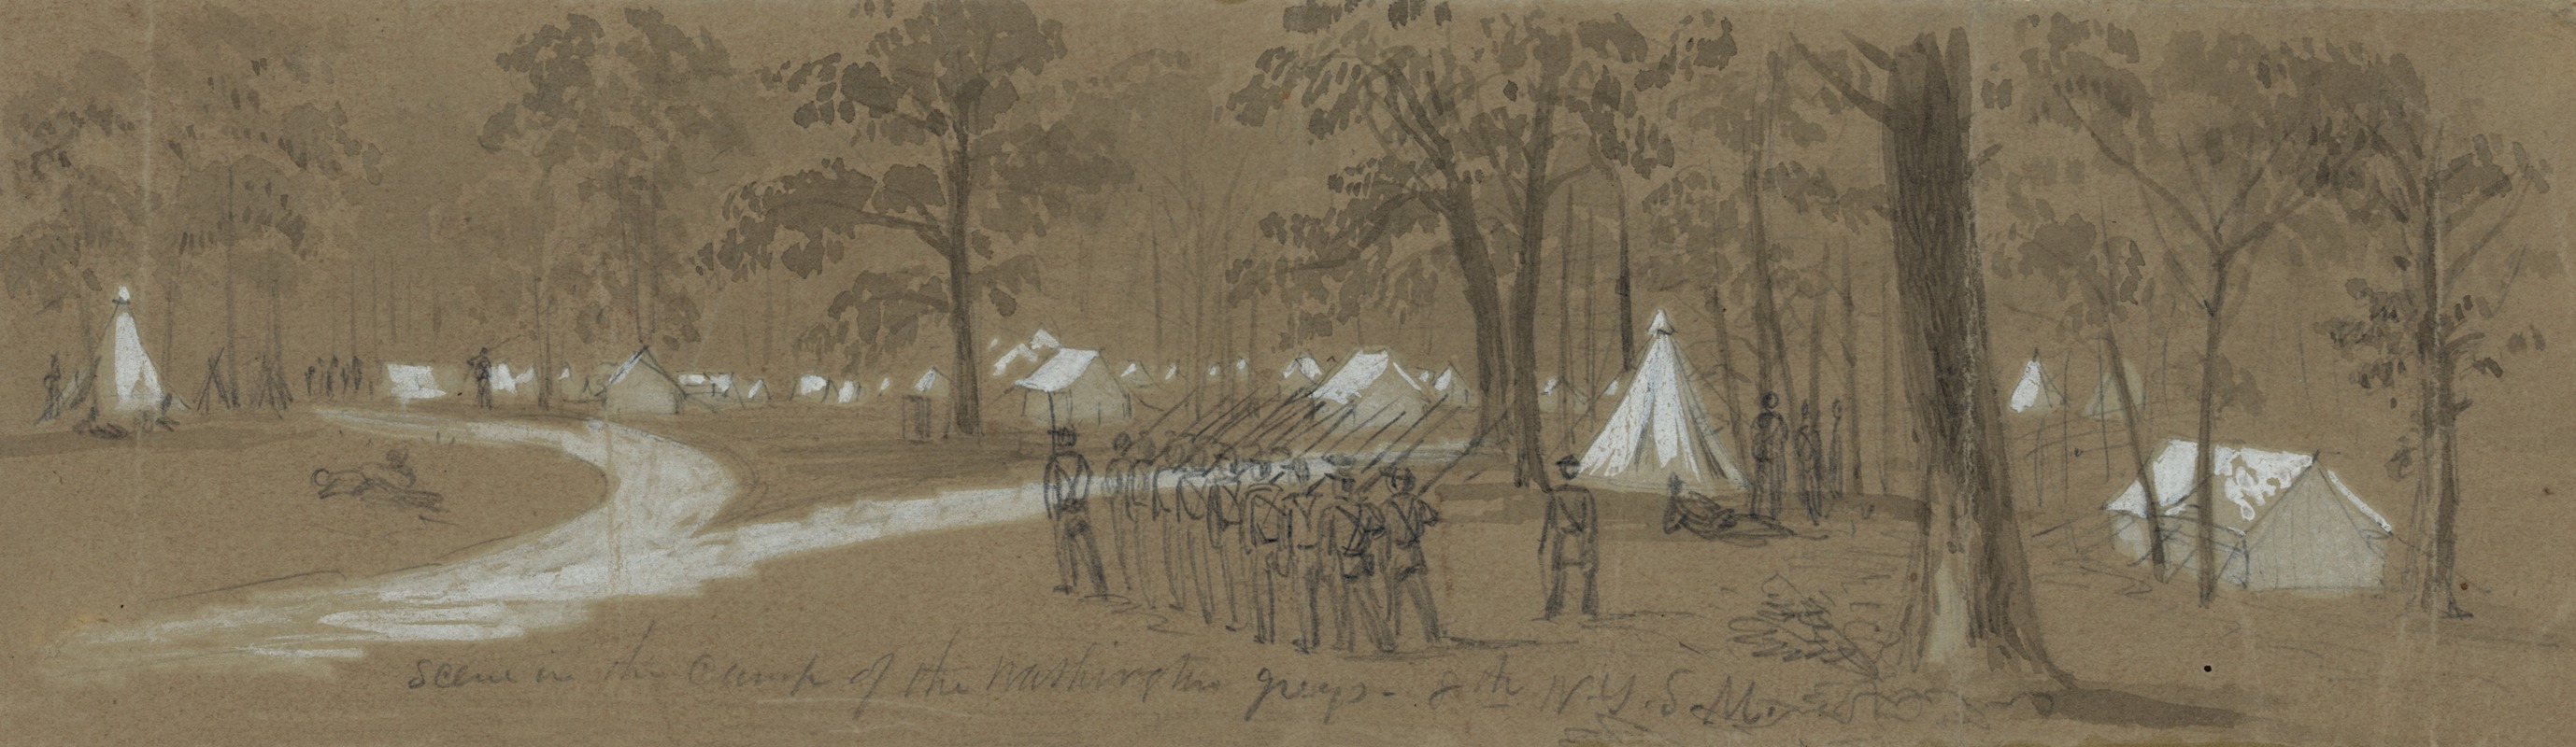 Alfred Rudolph Waud - Scene in the camp of the Washington Greys. 8th N.Y.S.M.